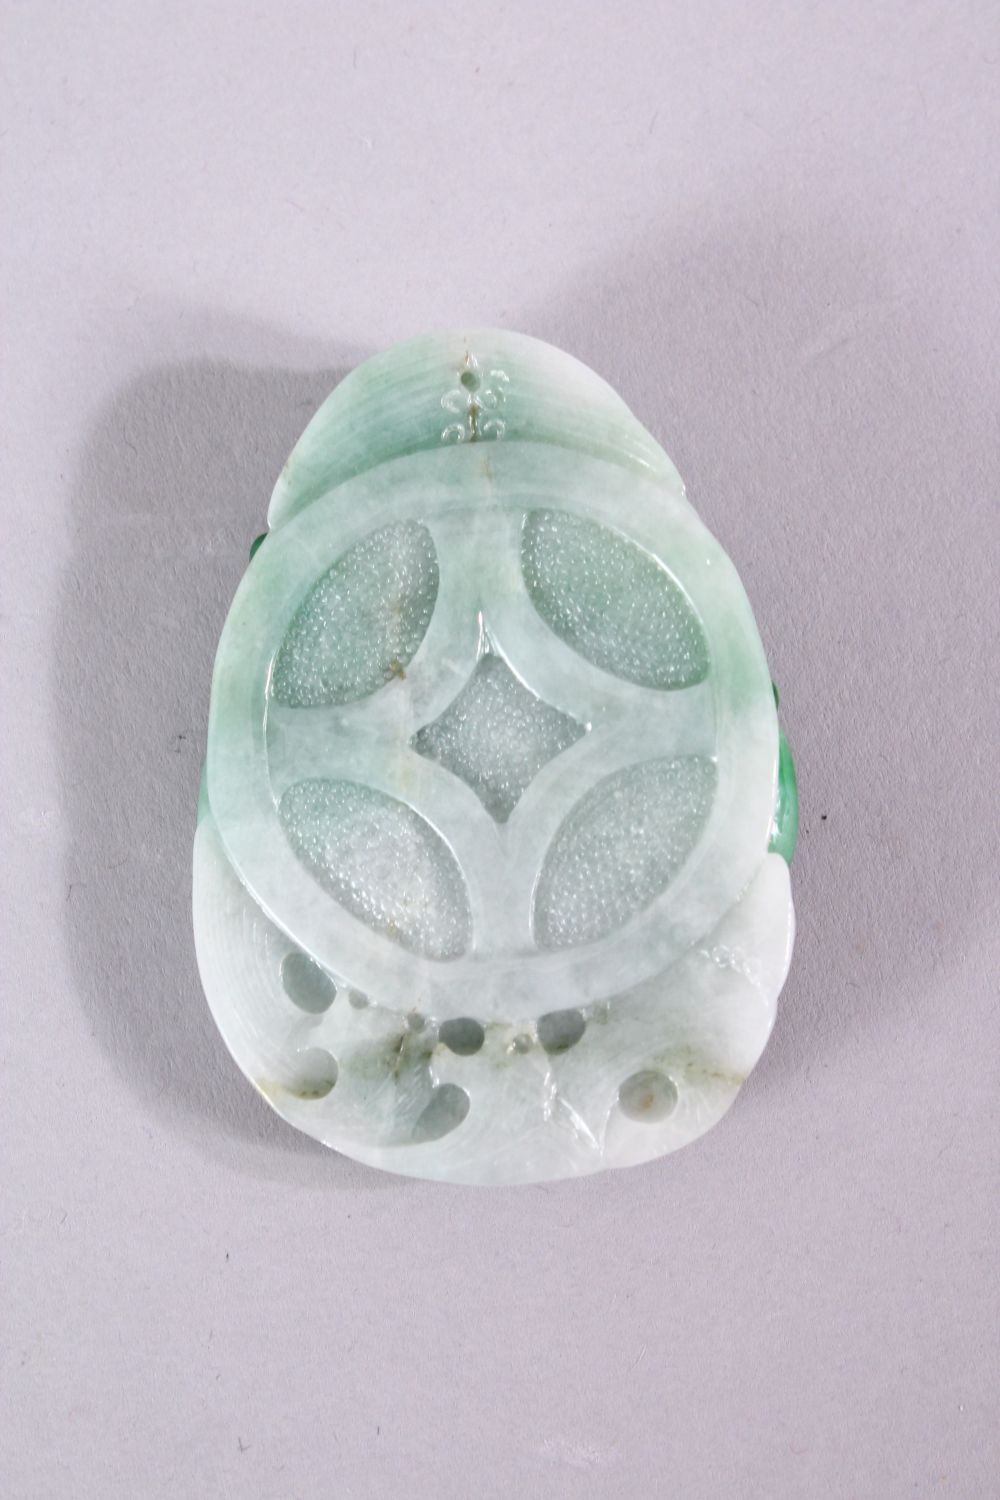 A CHINESE CARVED JADEITE PENDANT, 6cm x 4cm. - Image 2 of 2